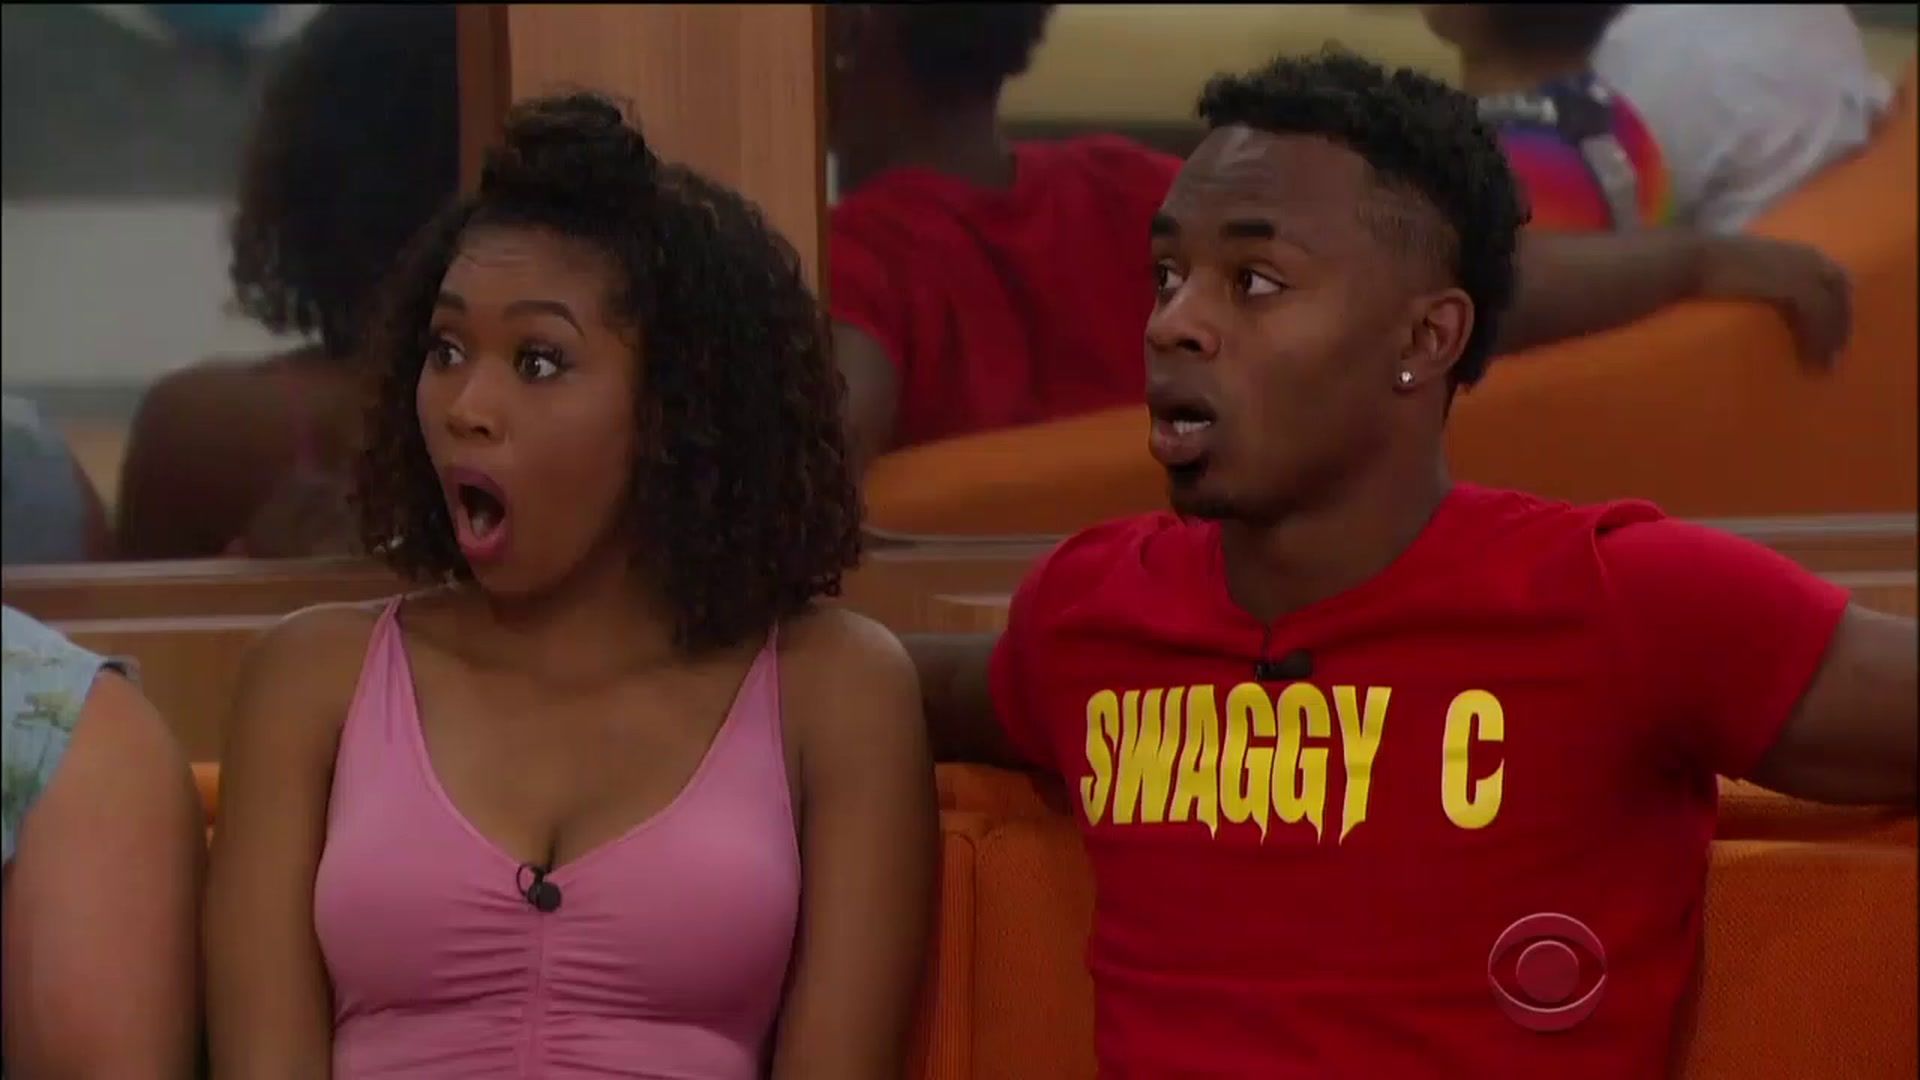 Swaggy C sitting with Bayleigh on the couch on eviction night in Big Brother, both with their mouths agape in shock. She is wearing a pink tank top and he a red T-shirt with the words &quot;Swaggy C&quot; written across the middle in yellow